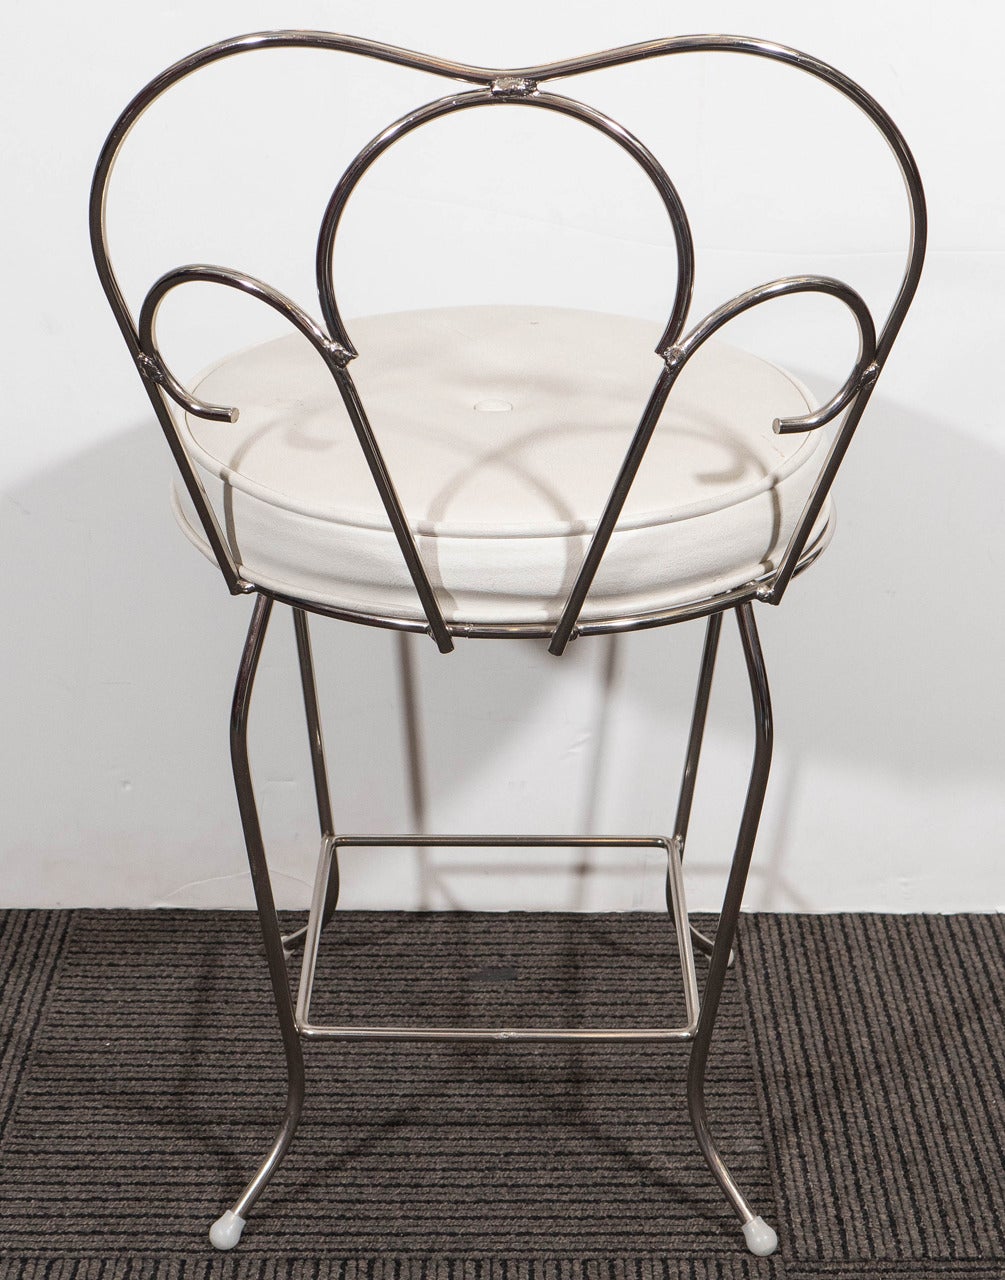 Chrome Pair of Vanity Stools with White Seats by George Koch Sons, Inc.